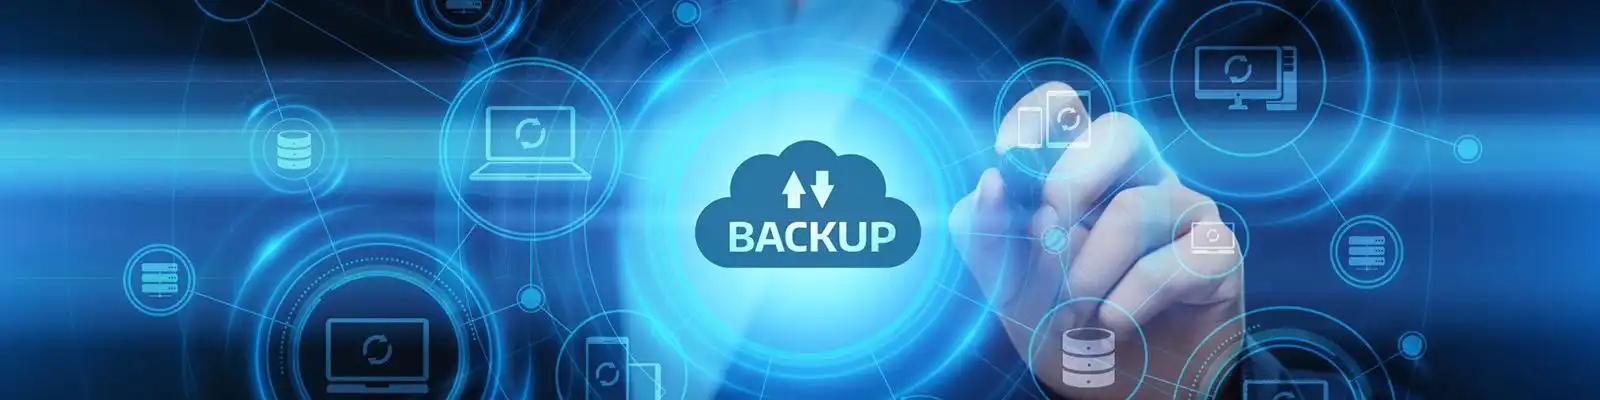 Backup Services from Technogeek